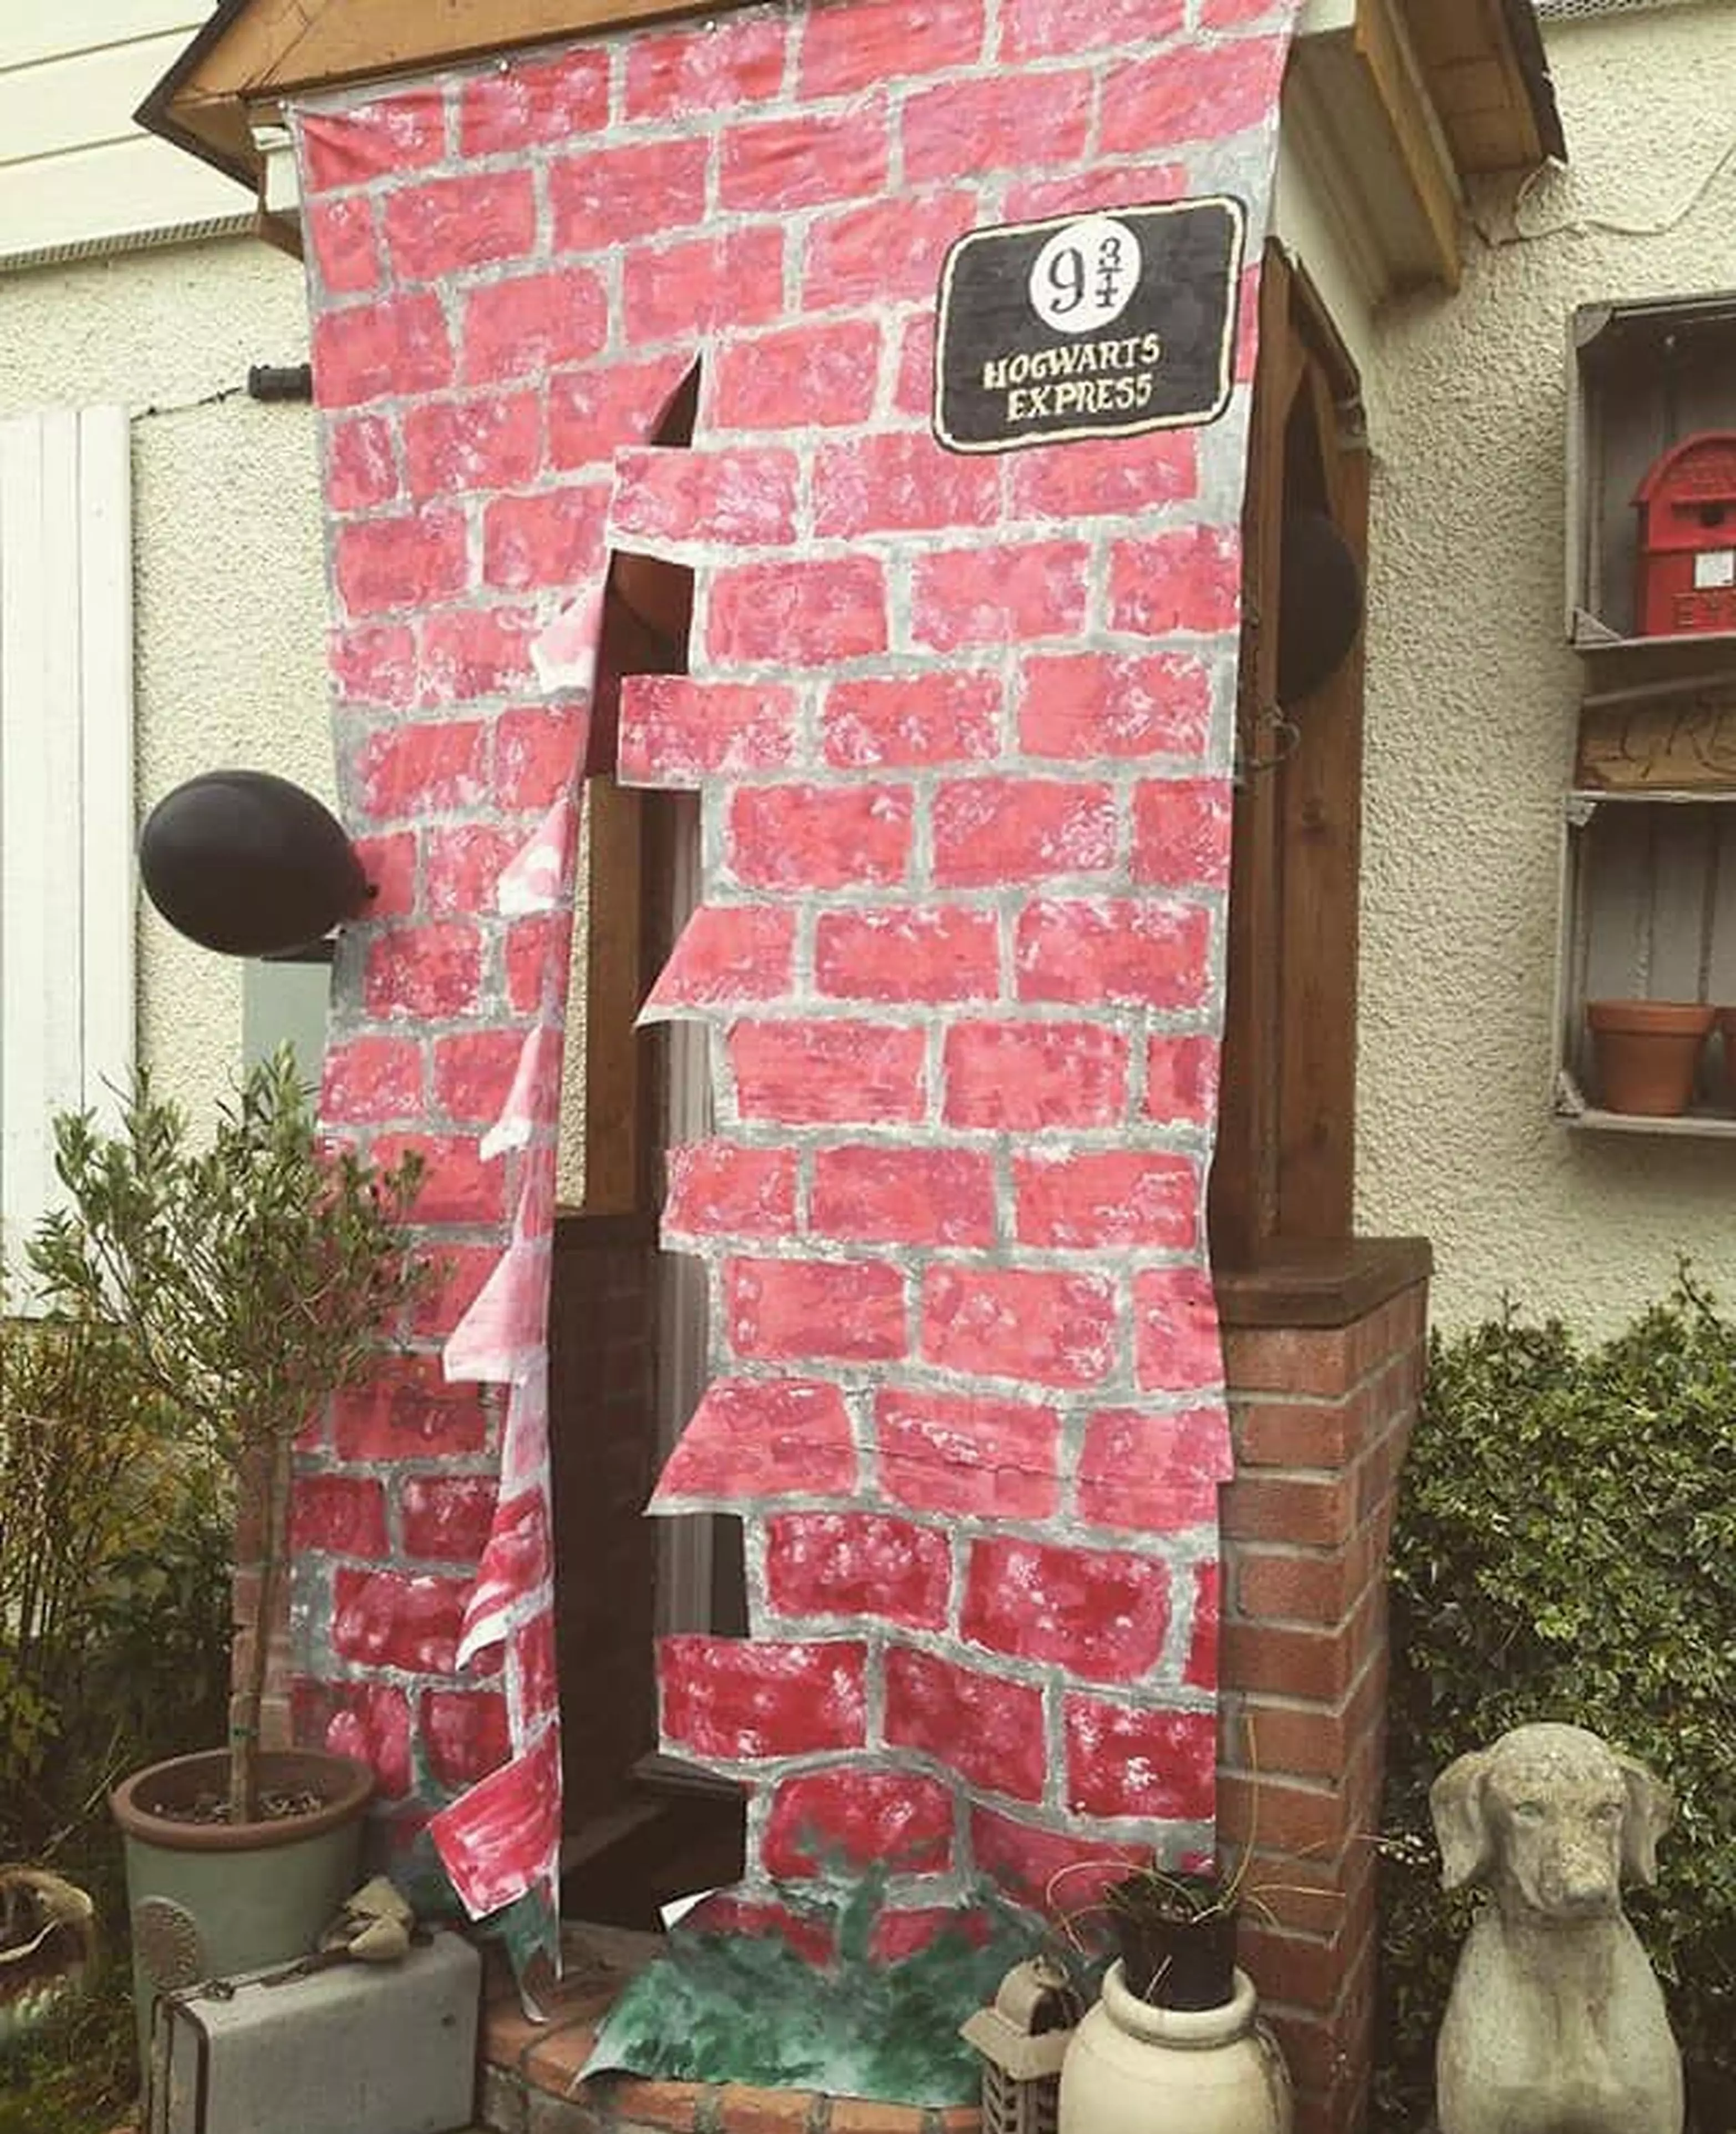 Hannah even created a Platform 9 and 3/4 for Poppy's birthday (